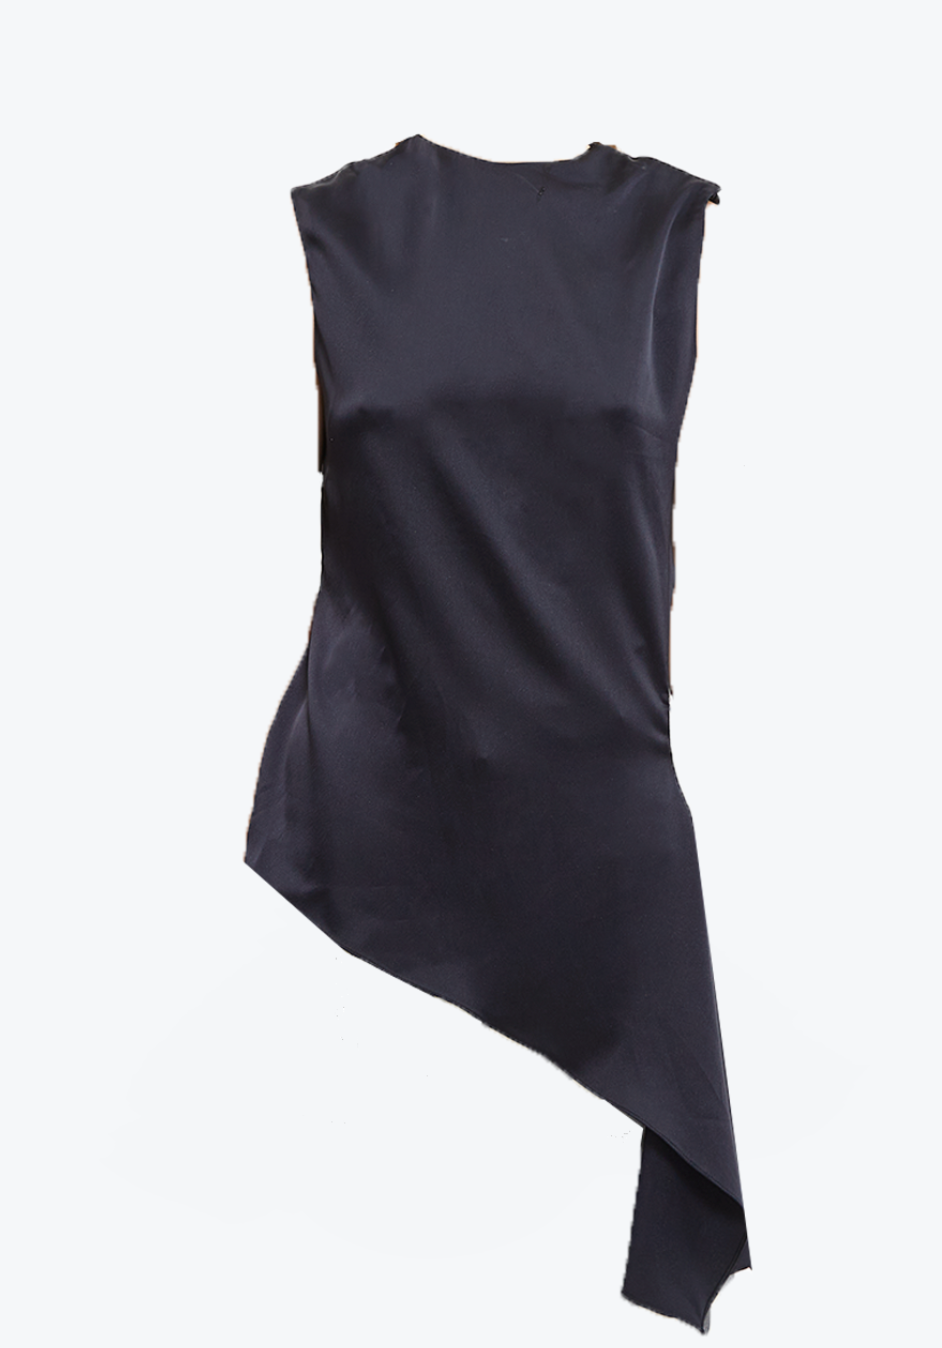 Cut-out Draped Top